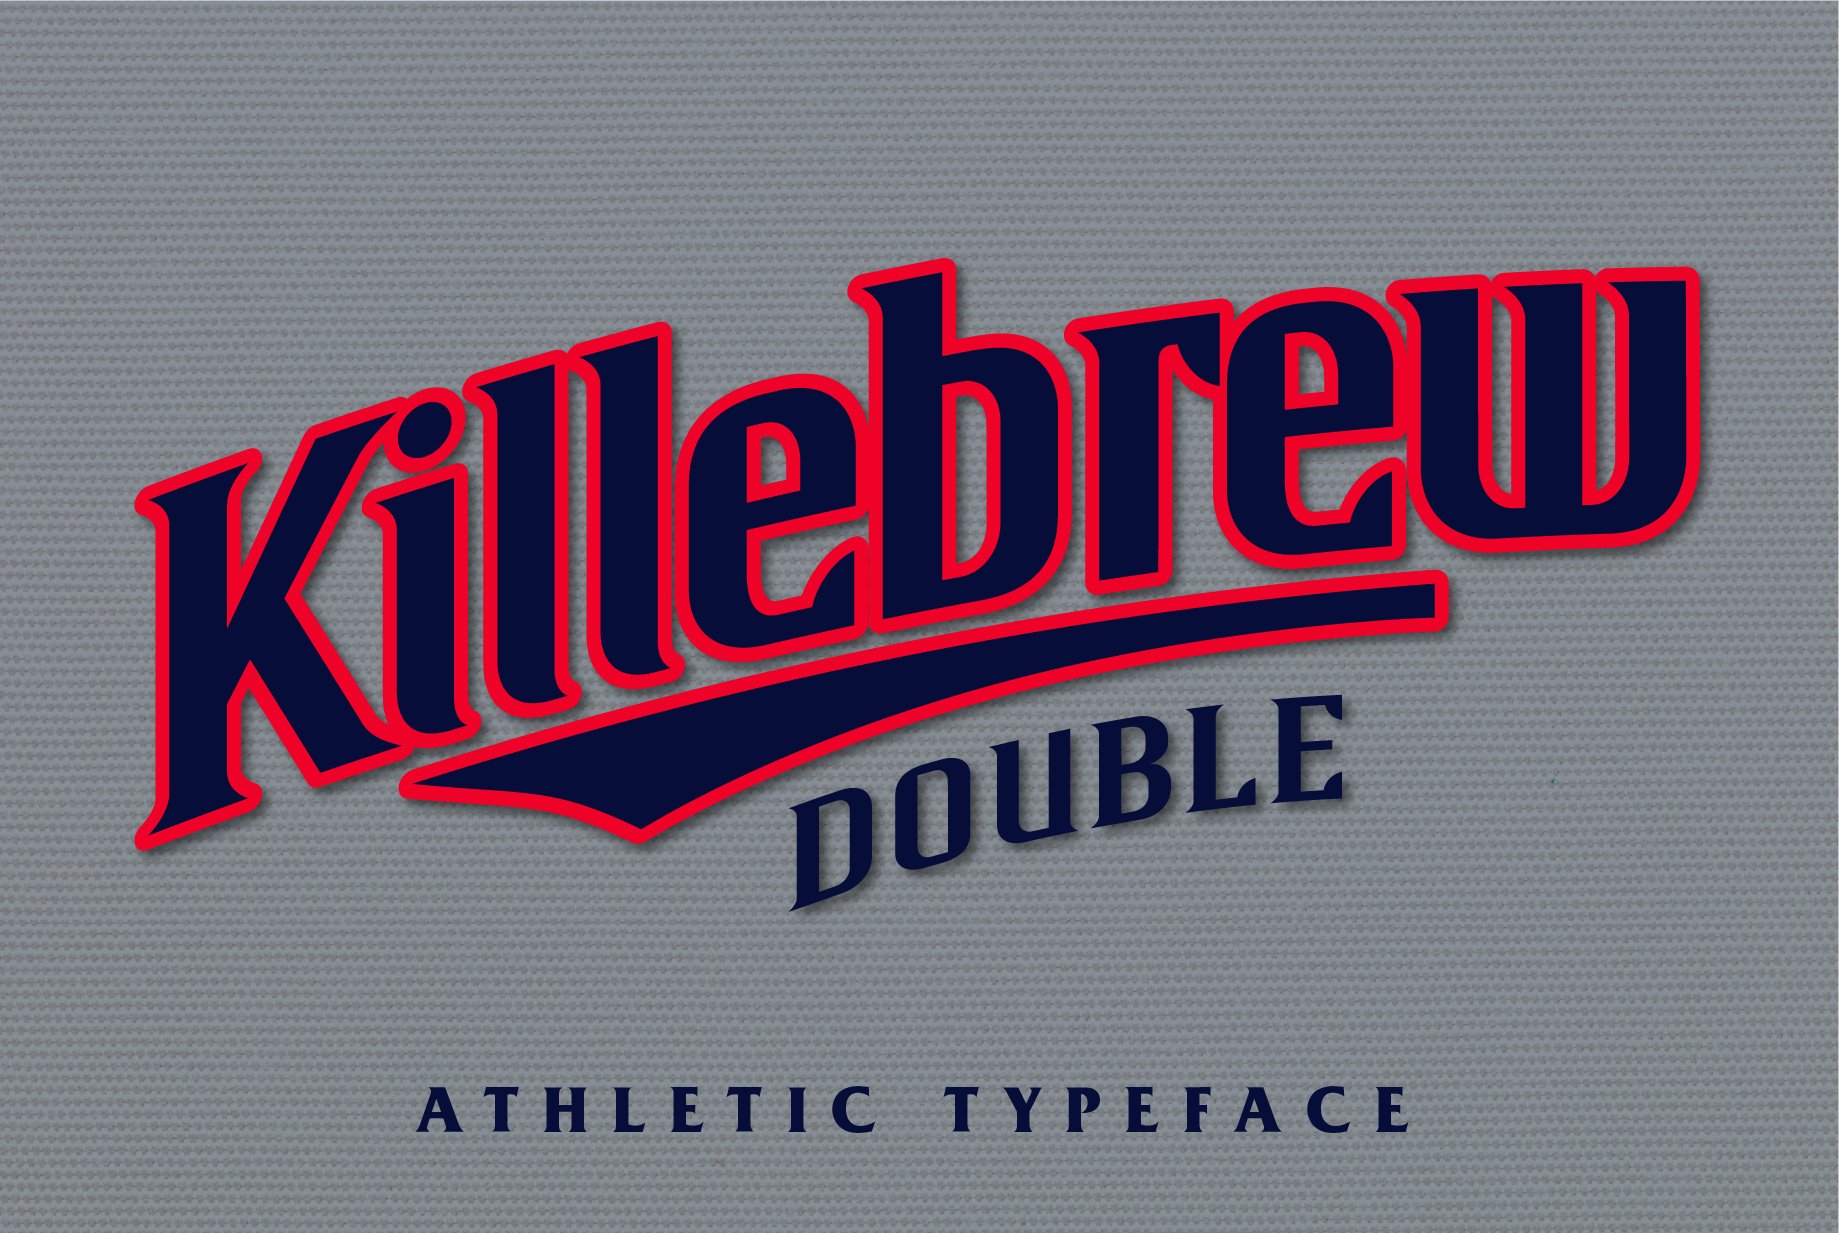 Double contour serif font in sport style Vector Image